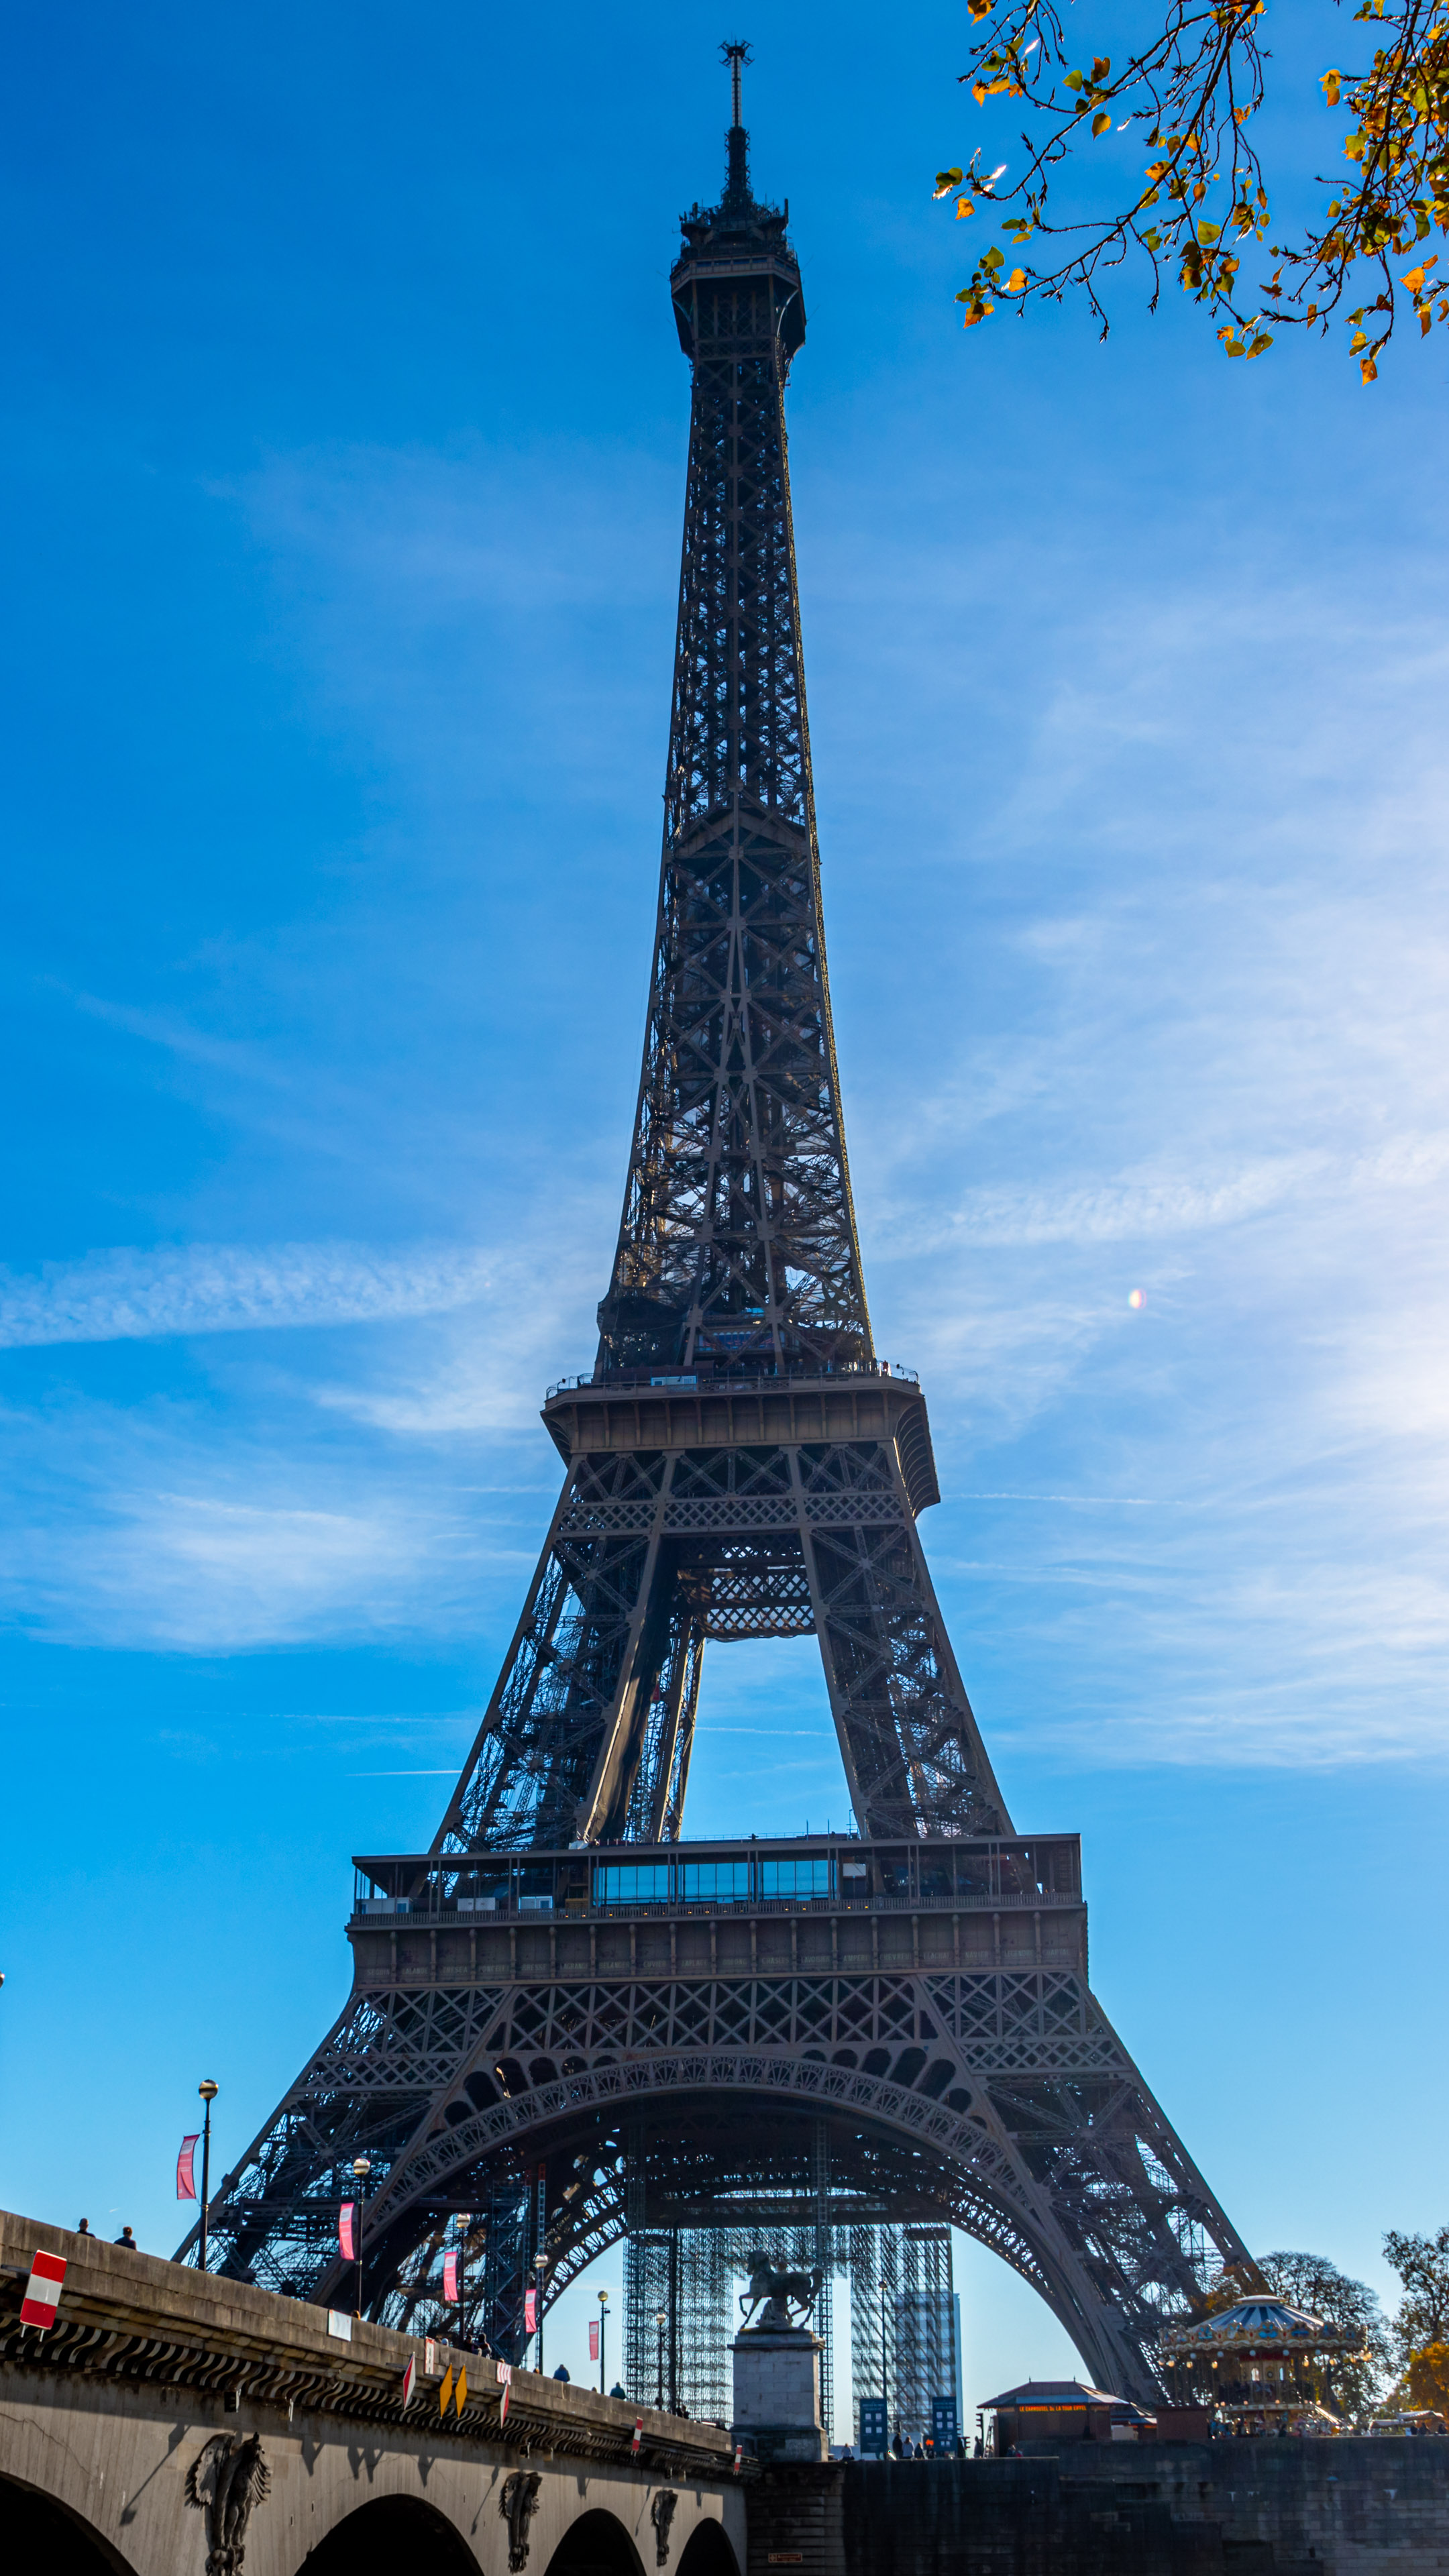 Admire the elegance of Paris from your screen with our 4K HD iPhone wallpaper featuring the iconic Eiffel Tower.